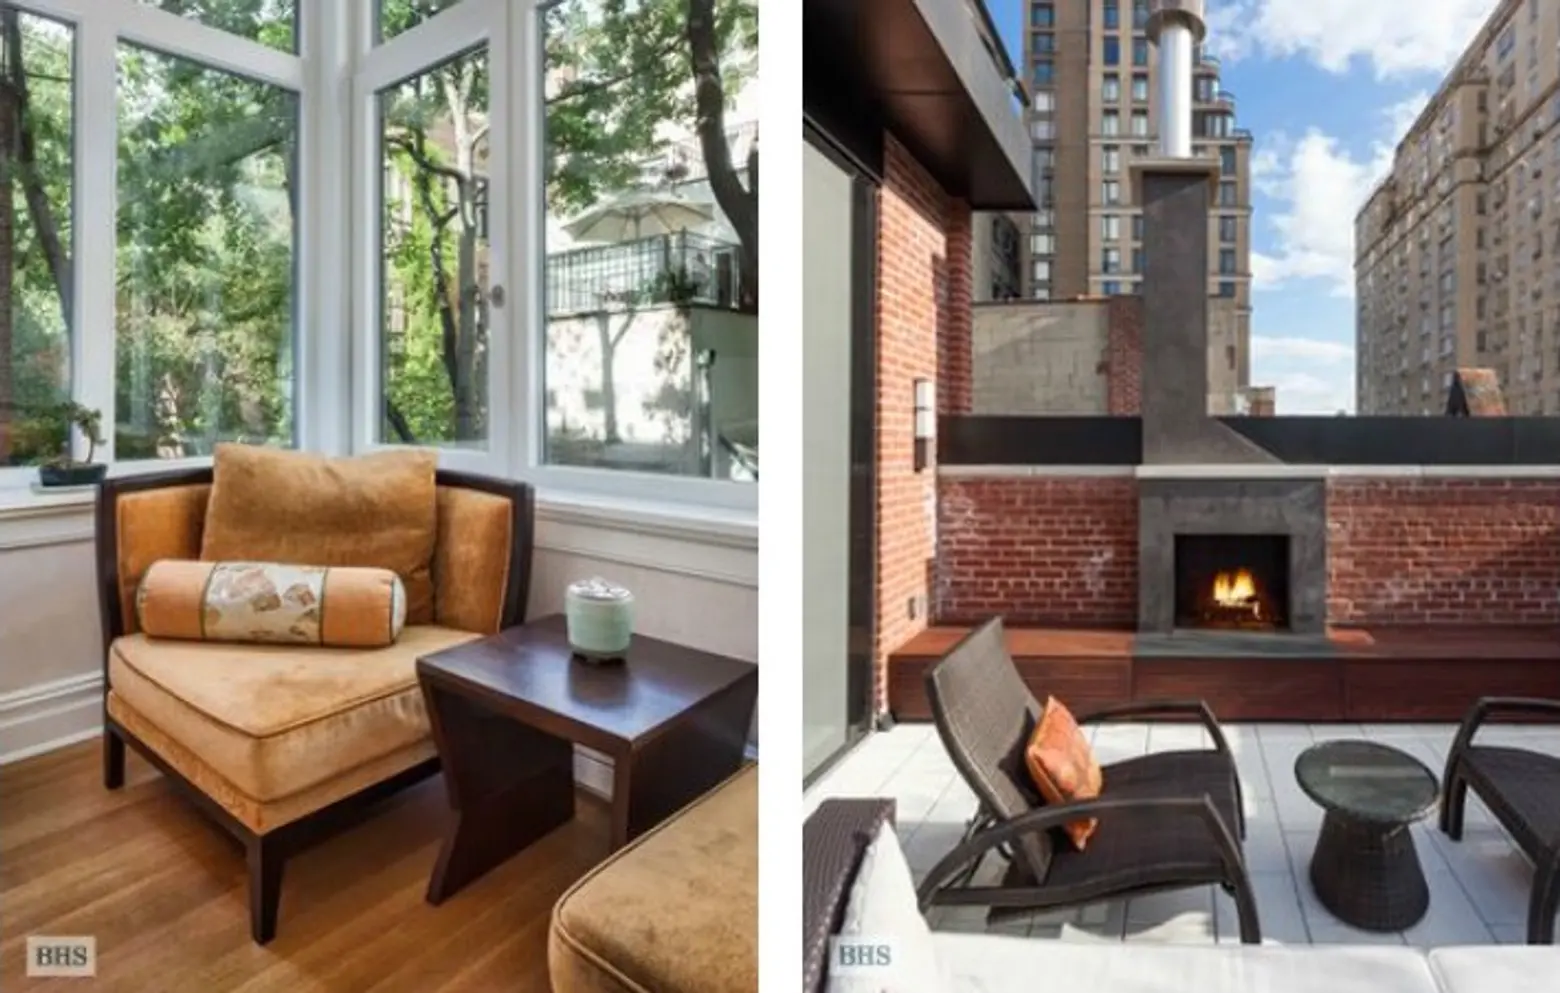 25 West 88th Street, Passive House, LEED certified, Baxt Ingui Architects, Kurt Roeloffs, Interiors, Cool Listings, Architecture, Renovation, Townhouse, Upper West Side, Historic Homes, Robert Taffera Construction